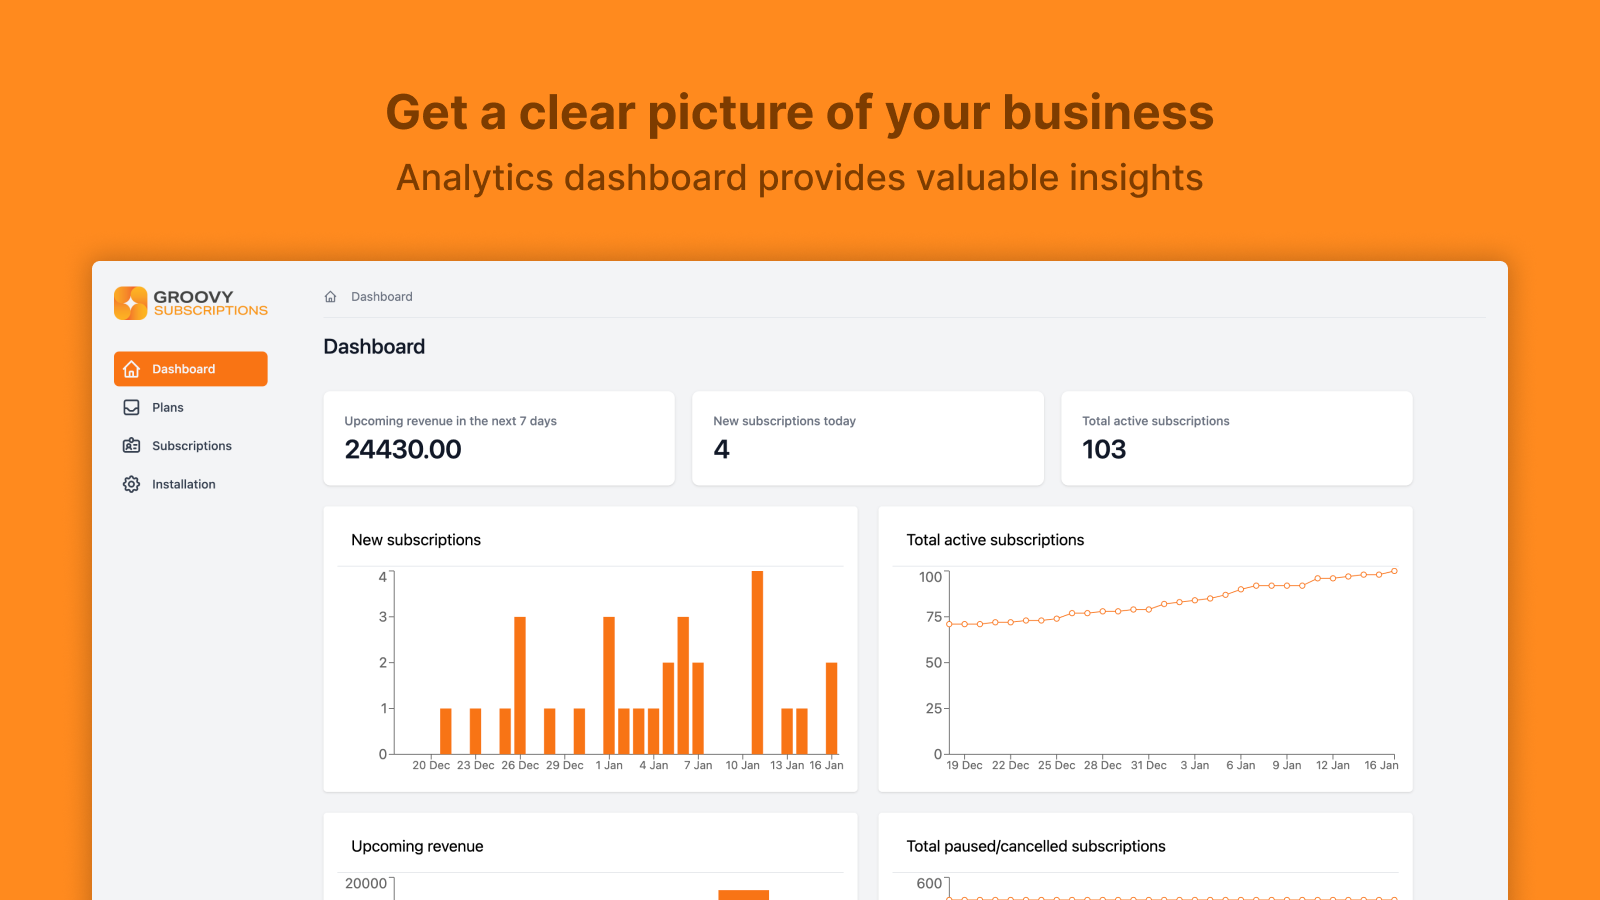 Analytics dashboard provides valuable insights